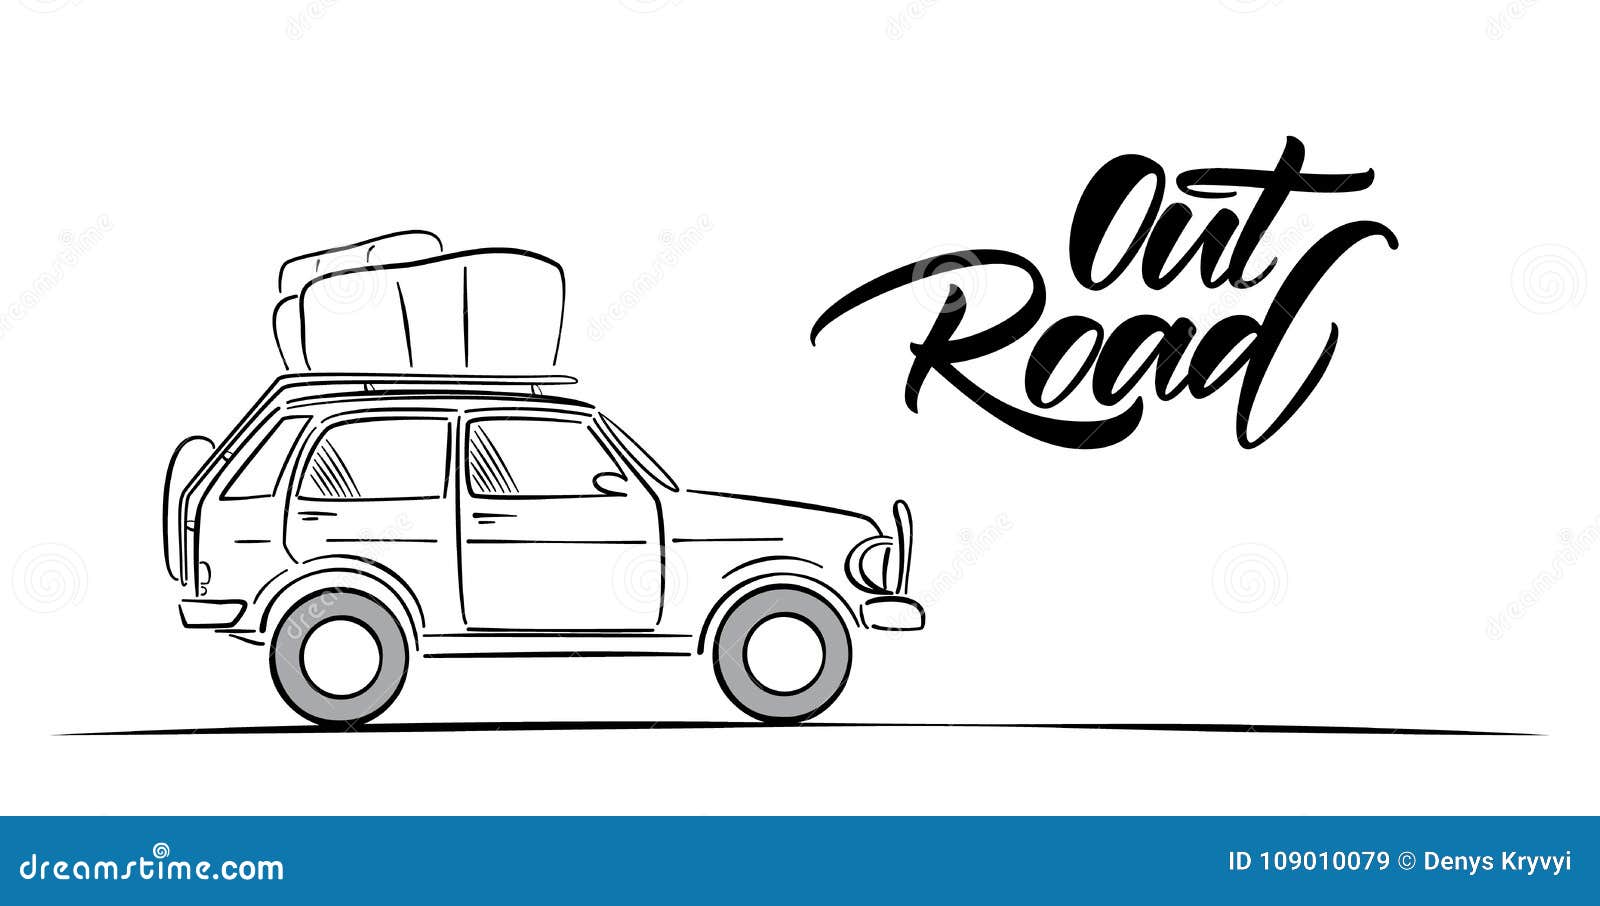 Hand Drawn Travel Car and Handwritten Lettering of Out Road. Sketch Line  Design Stock Vector - Illustration of logo, road: 109010079